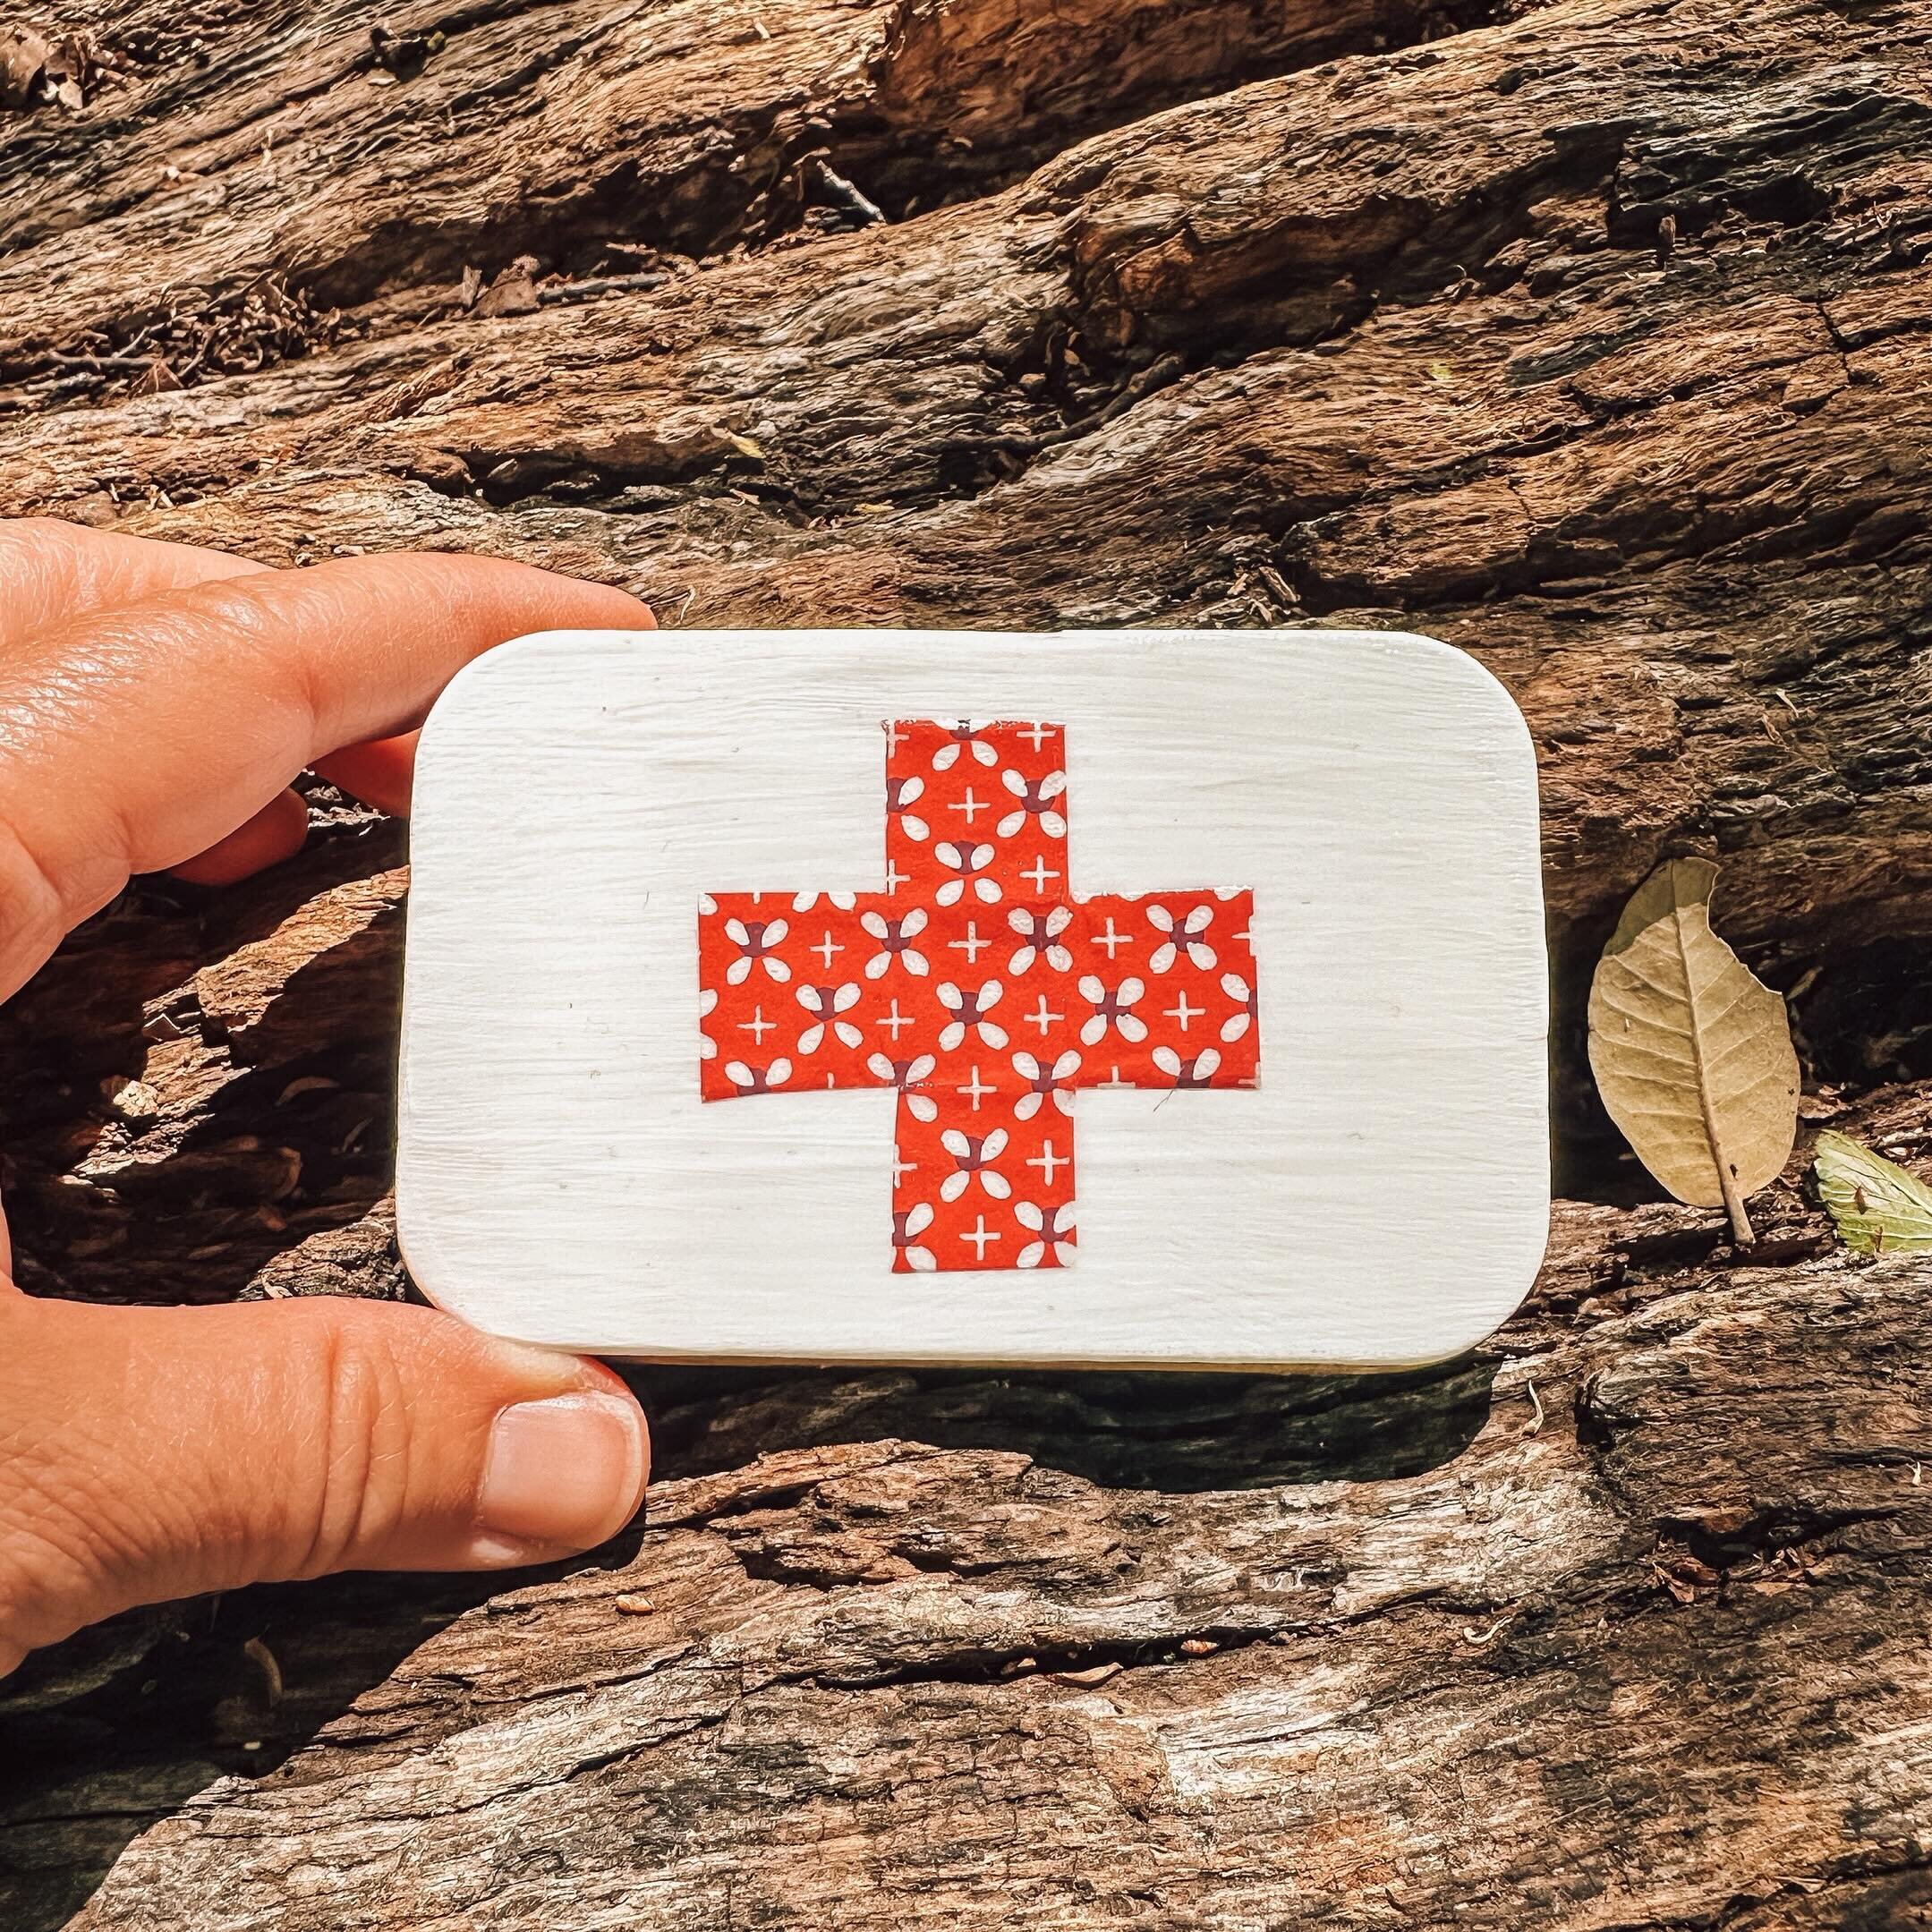 A community of friends &amp; family you can count on is crucial, kind of like a first aid kit. 🩹❤️

I now always carry my mini-first-aid kit with me, and I can&rsquo;t tell you how many times I have had to use it for my kids or someone else&rsquo;s.